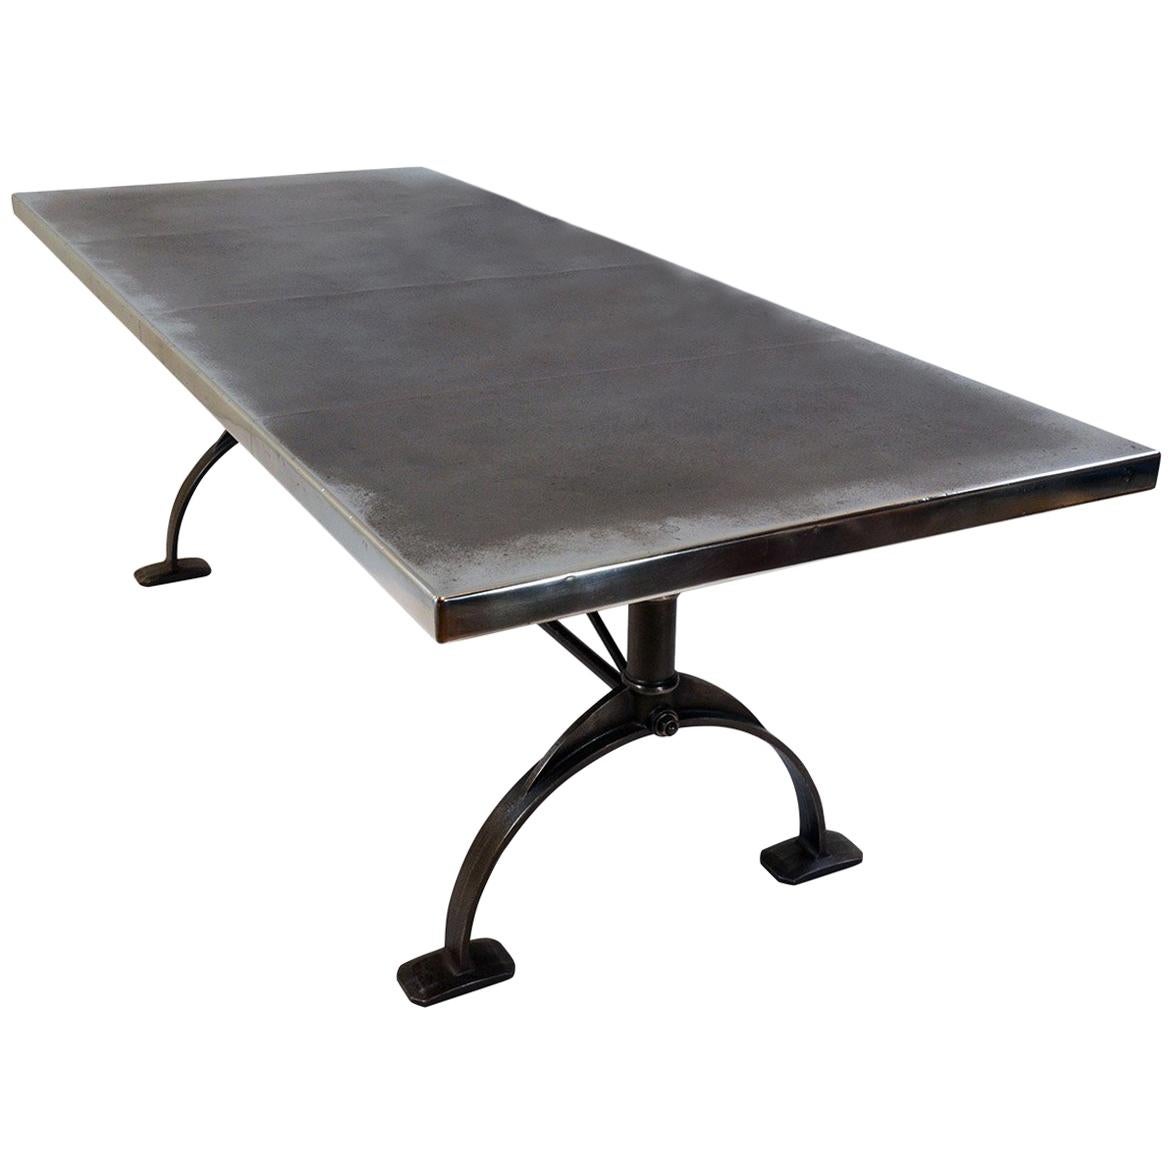 Antique Patinated Zinc-Top Dining Table, Cast Iron Legs For Sale